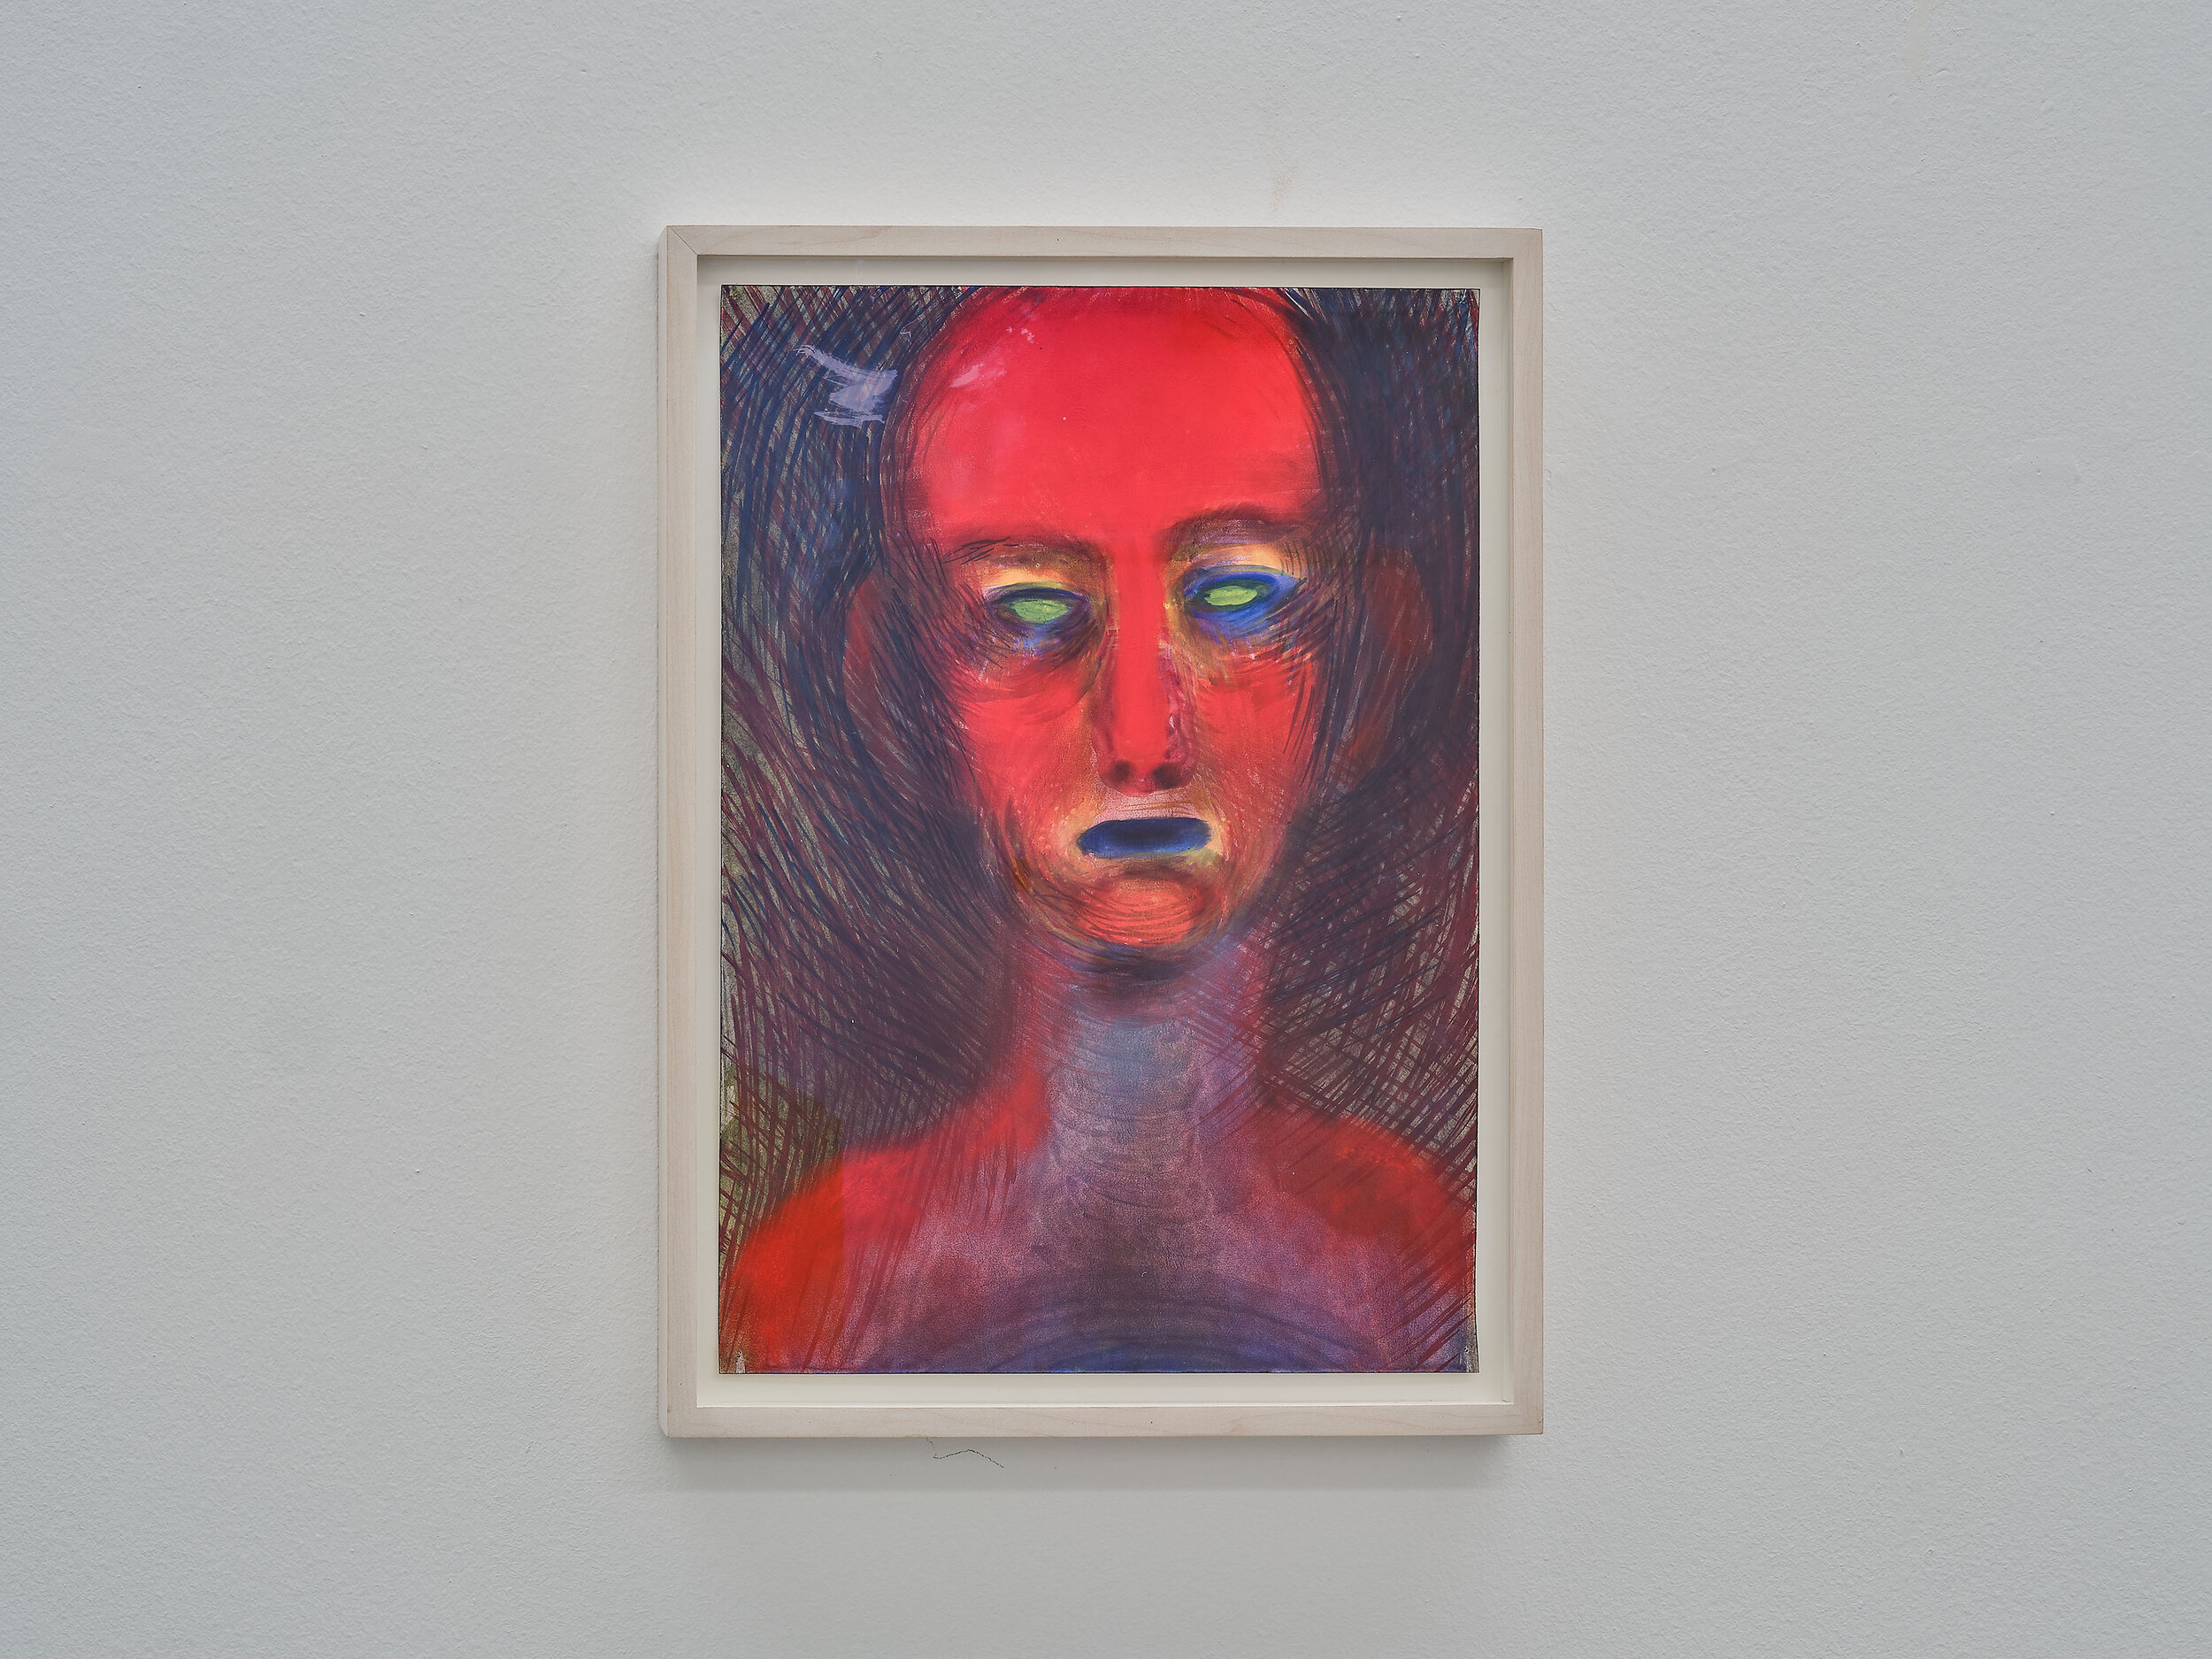  Miriam Cahn Soldat, Dec. 1994 Chalk and pigment and watercolour on paper 42 x 29.50 cm Courtesy Galerie Michael Haas 